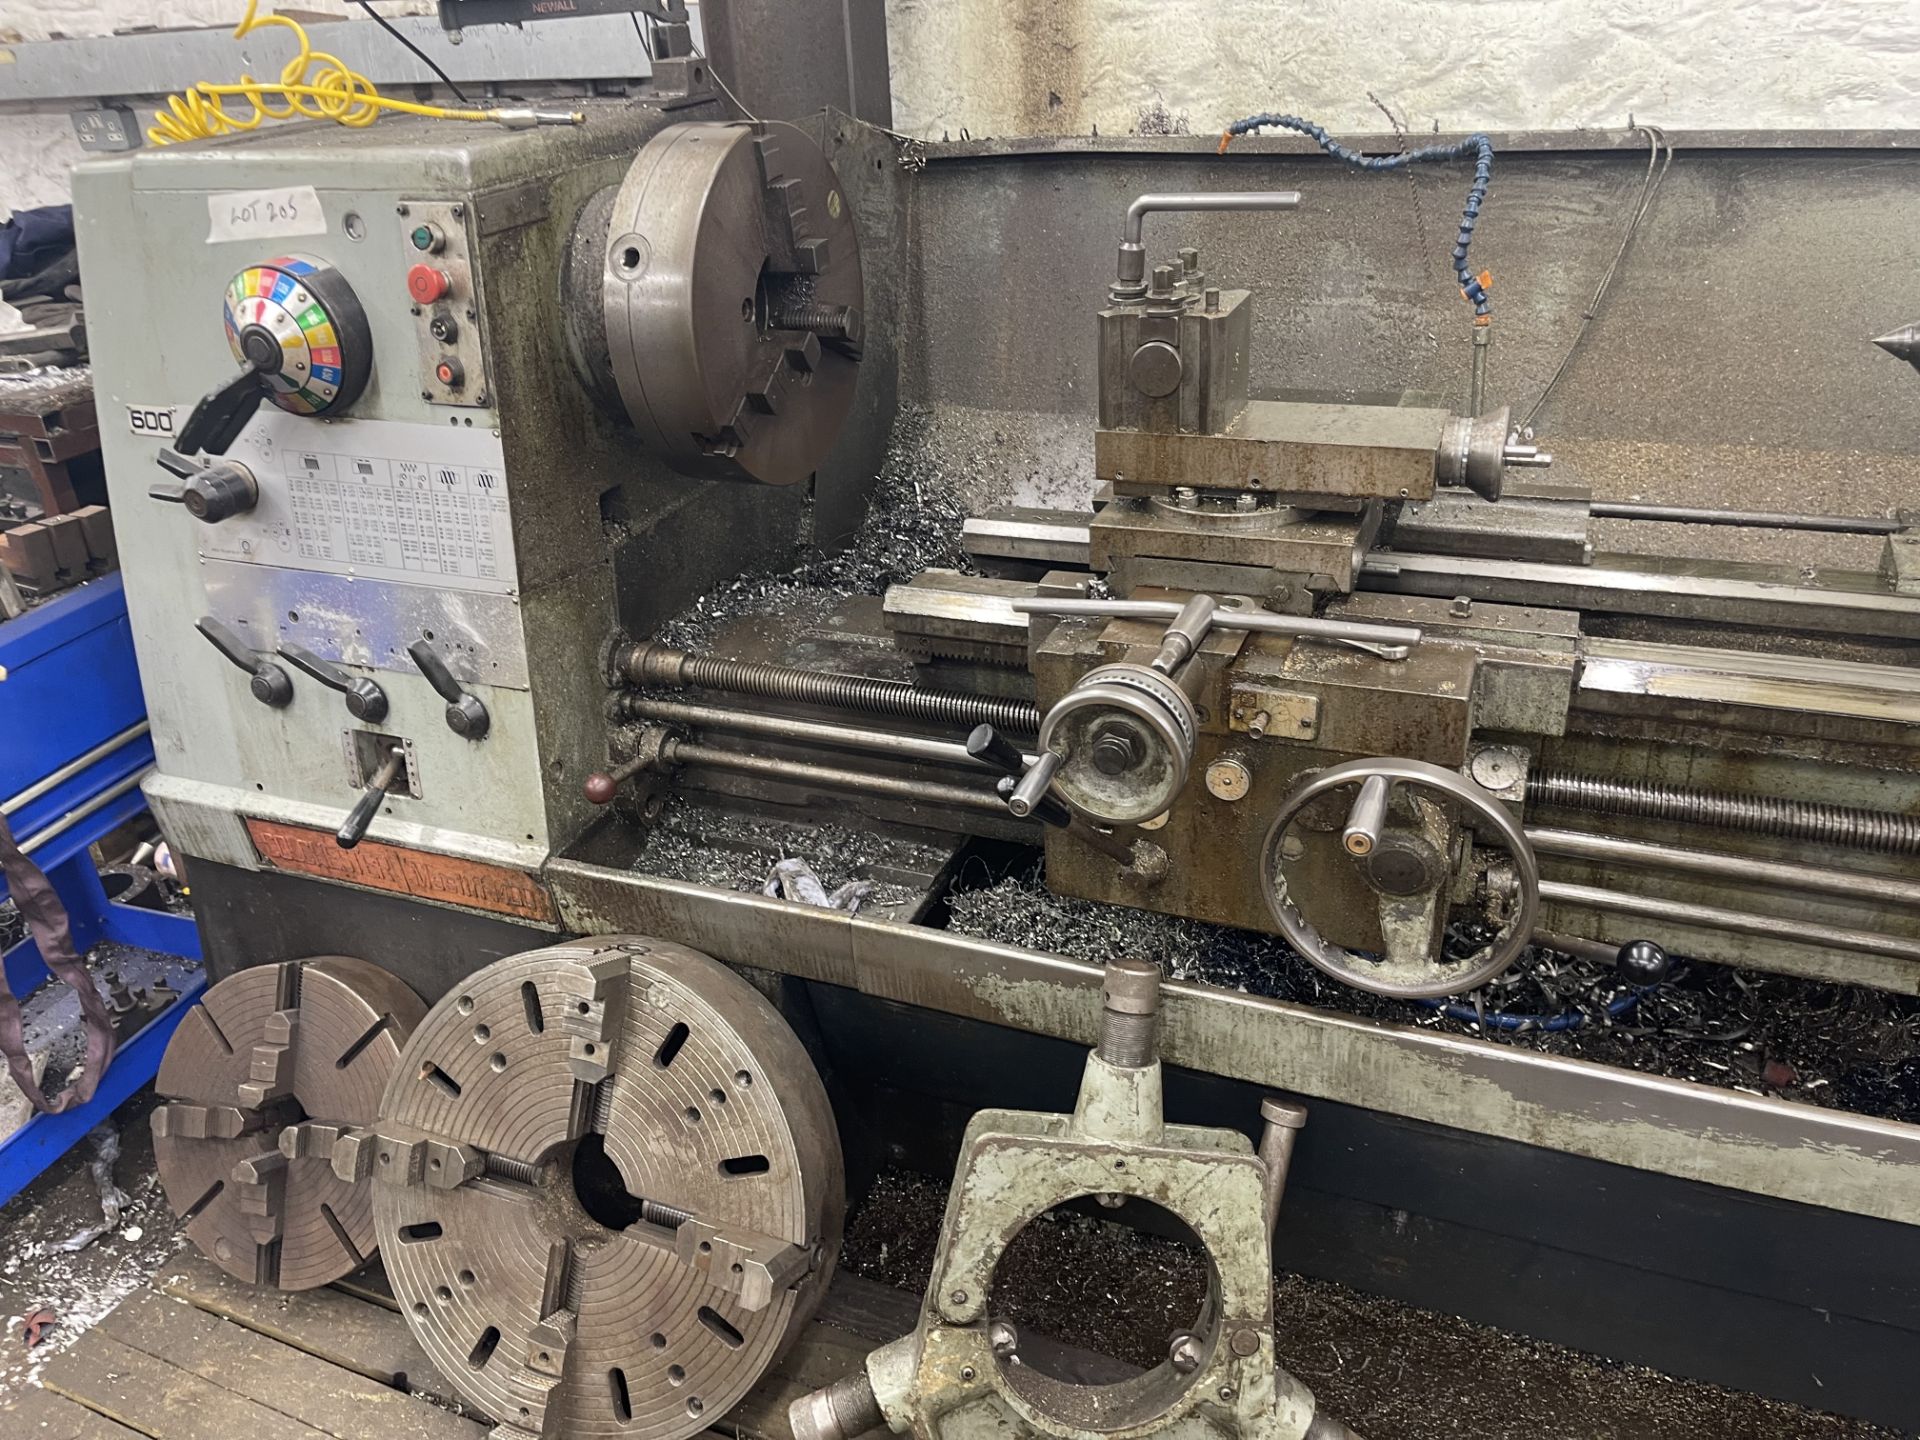 Colchester Mastiff 1400 GAP BED LATHE, taper turning, 3 and 4 jaw chucks, face plate, fixed - Image 2 of 4